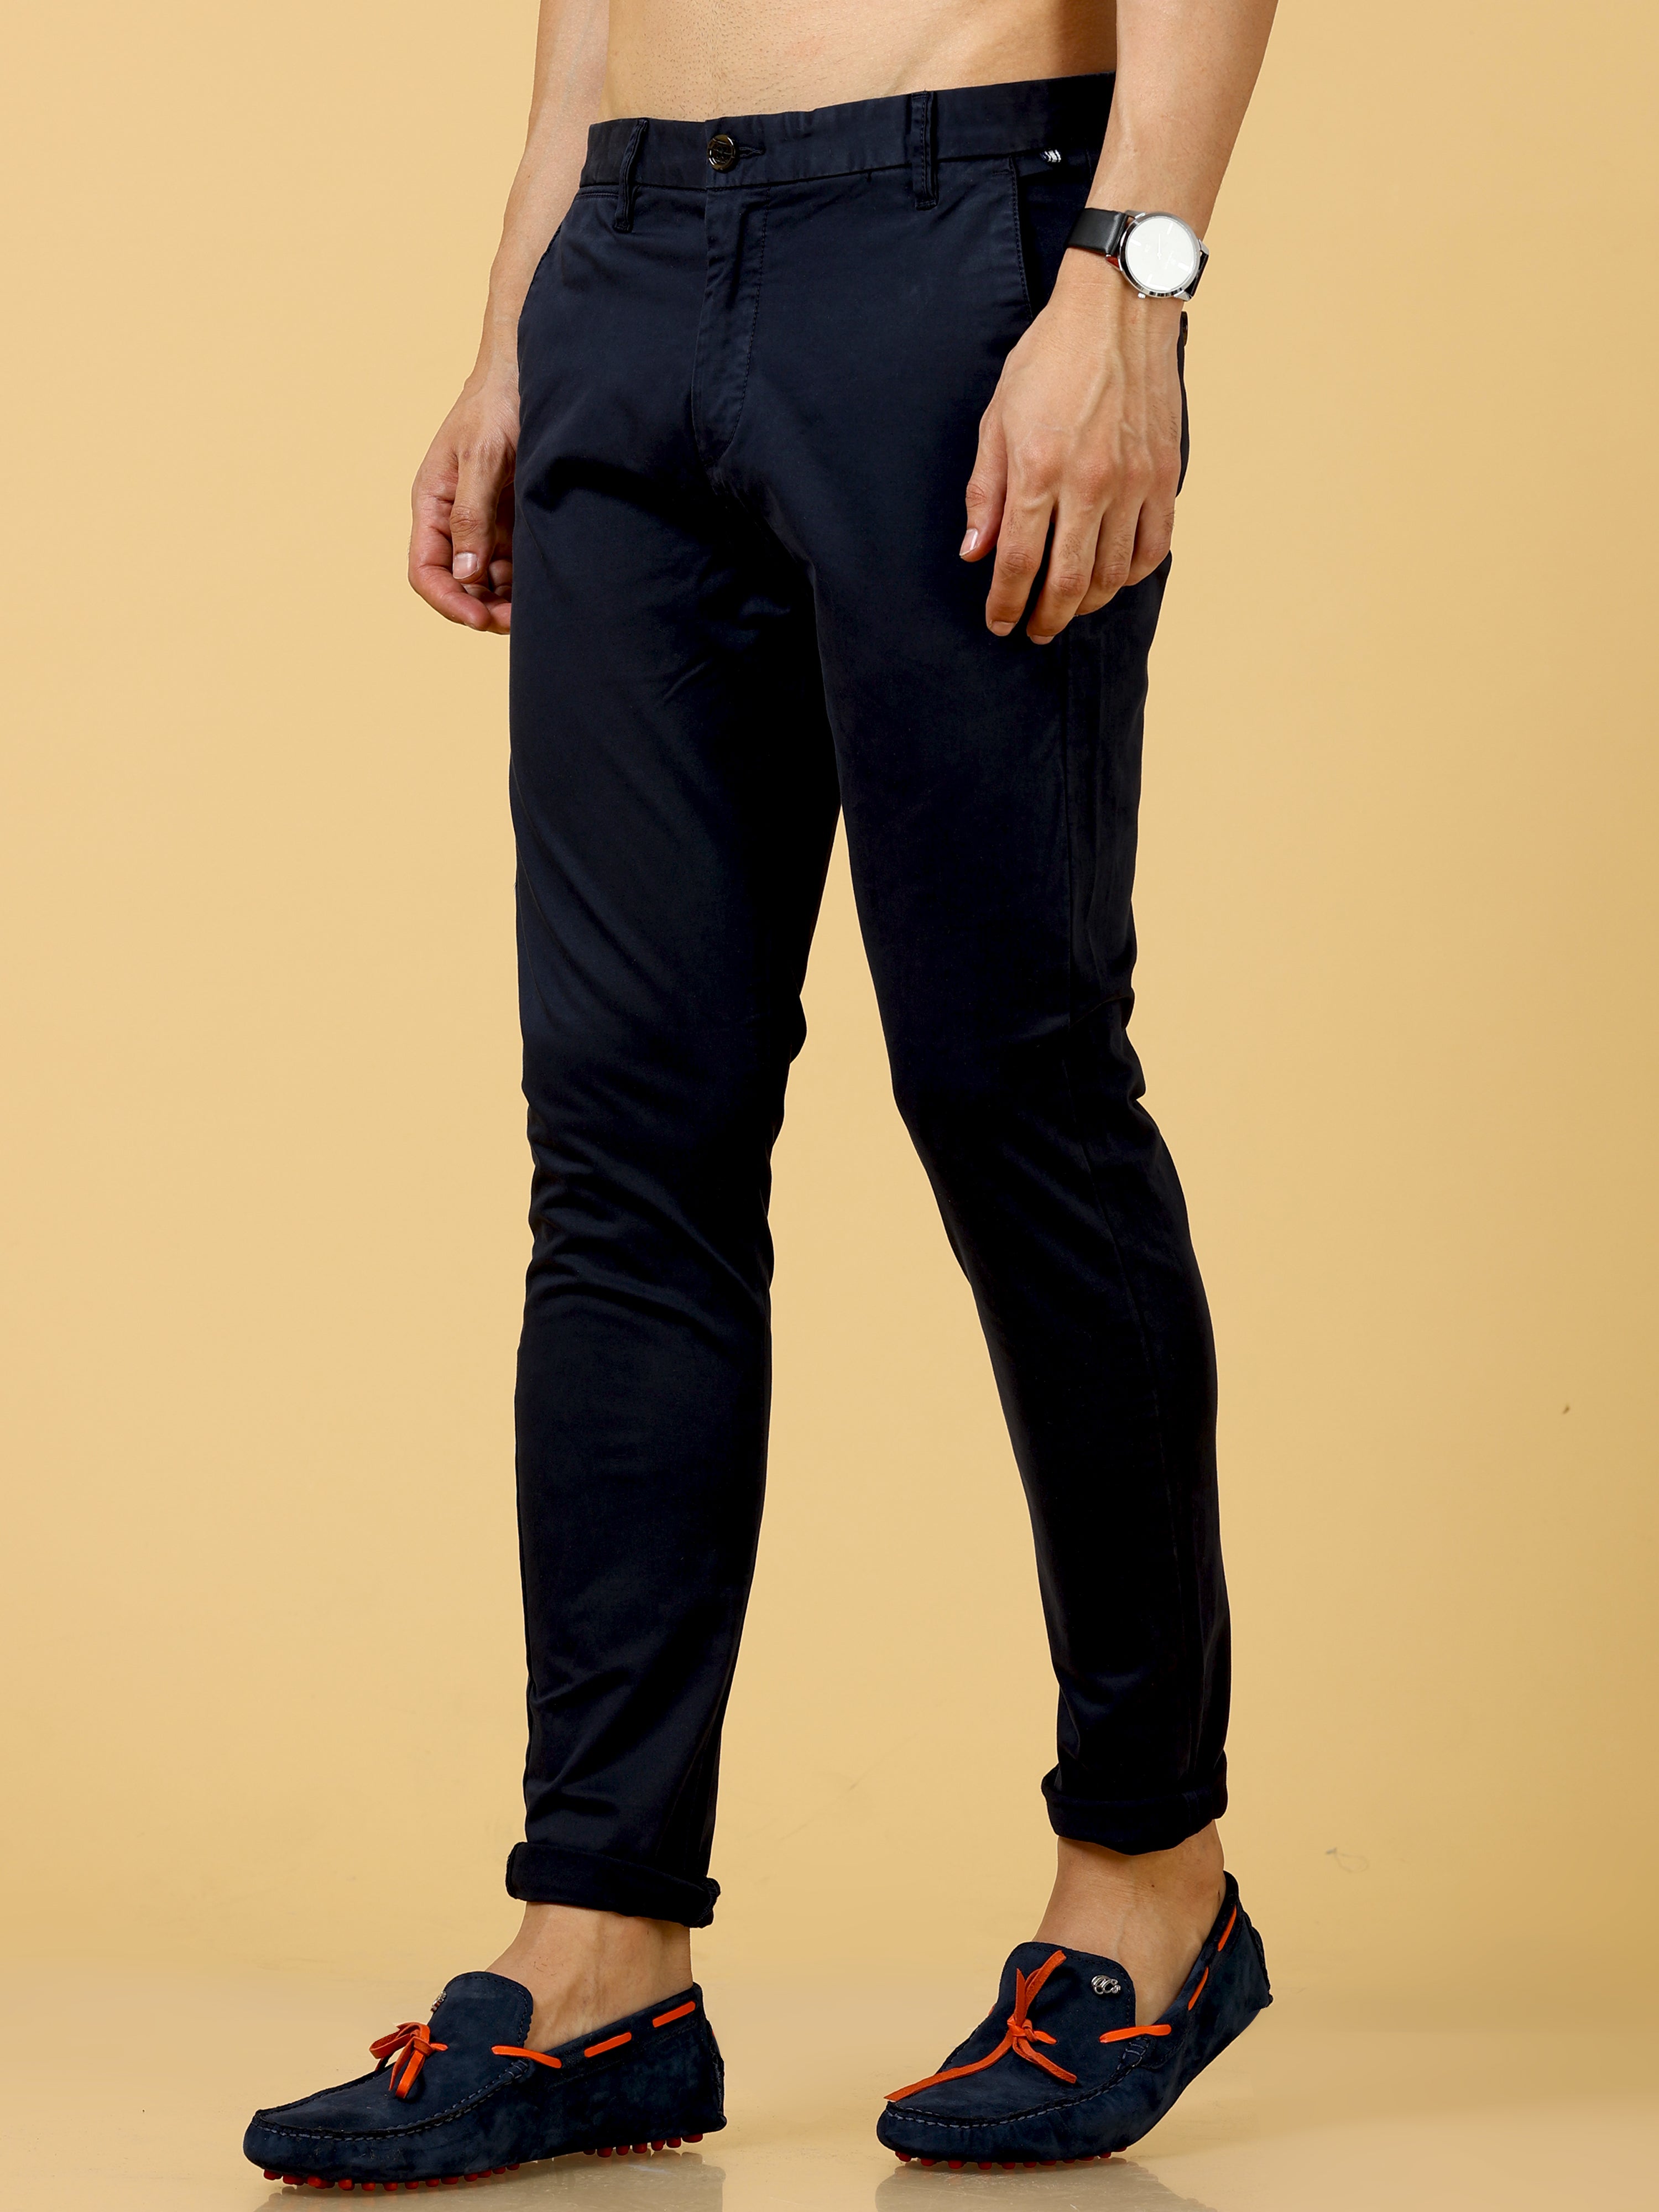 Casual Trousers - Buy branded Casual Trousers online cotton, cotton blend,  casual wear, party wear, Casual Trousers for Men at Limeroad.